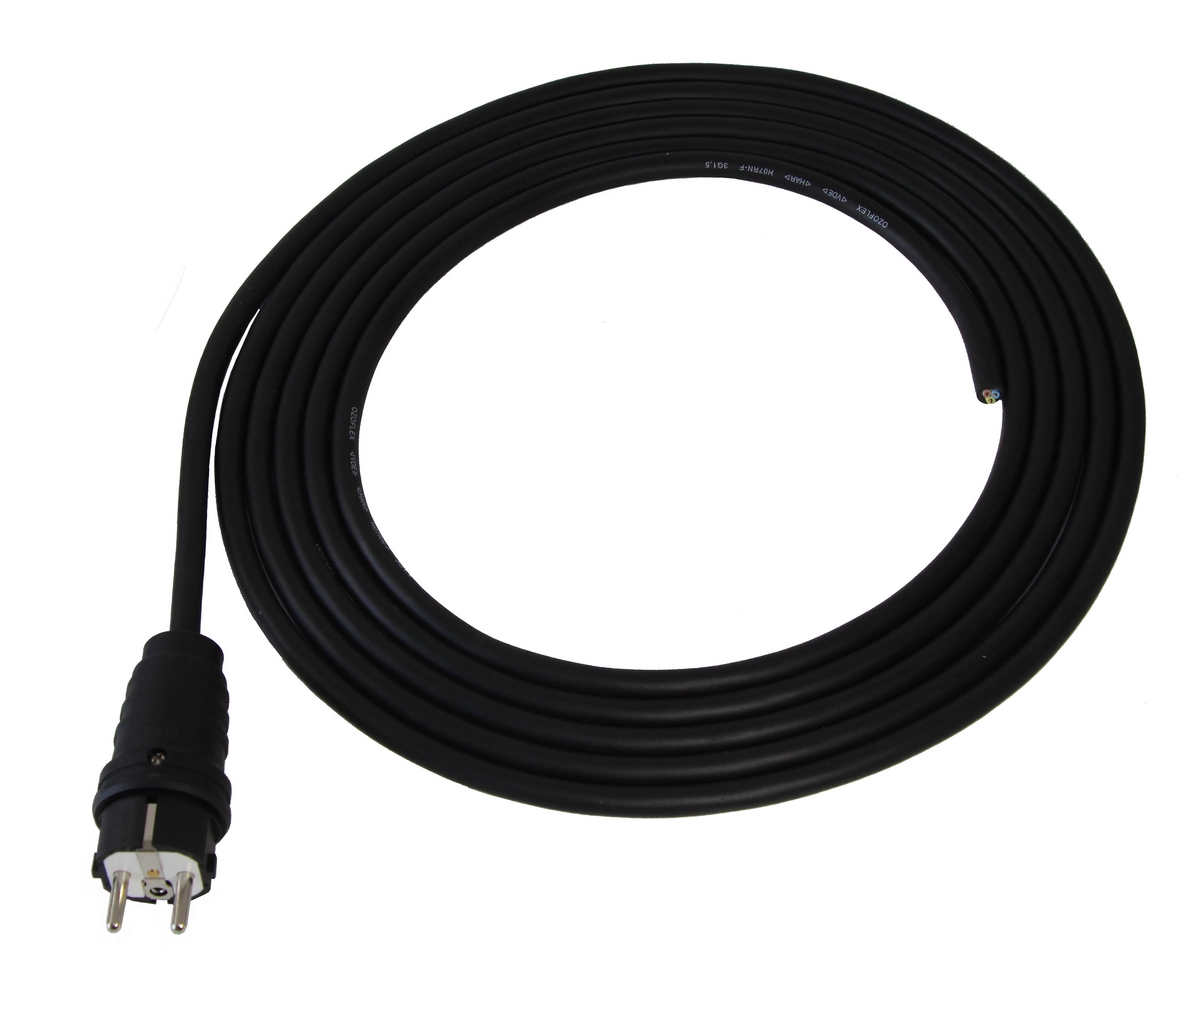 Connection cable 3 x 1.5 mm² with Schuko plug 230 volts